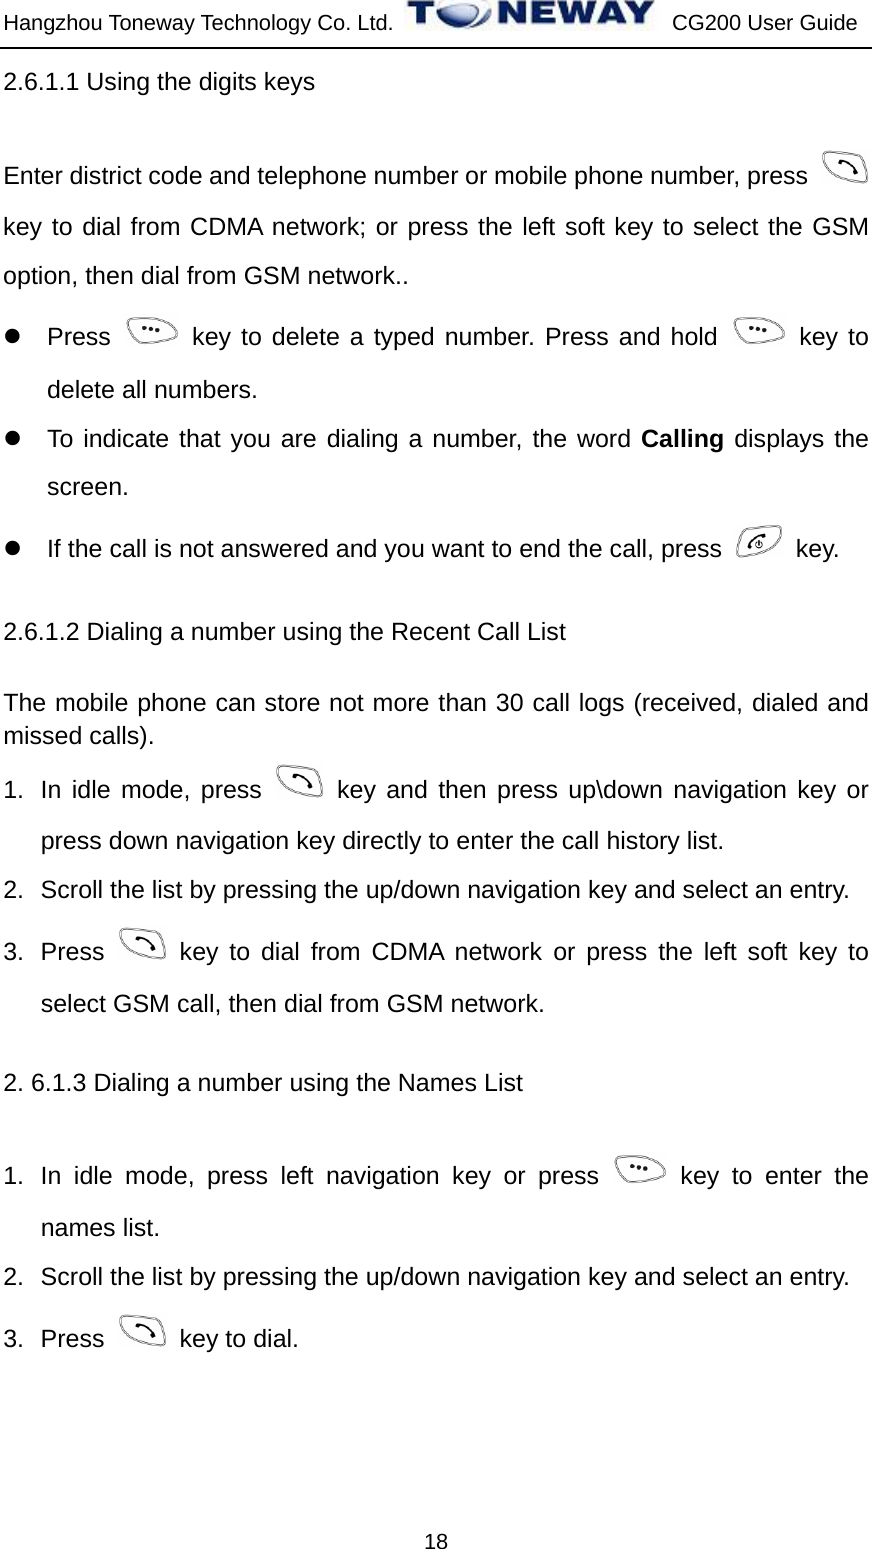 Hangzhou Toneway Technology Co. Ltd.    CG200 User Guide 18 2.6.1.1 Using the digits keys Enter district code and telephone number or mobile phone number, press   key to dial from CDMA network; or press the left soft key to select the GSM option, then dial from GSM network.. z Press   key to delete a typed number. Press and hold   key to delete all numbers. z  To indicate that you are dialing a number, the word Calling displays the screen. z  If the call is not answered and you want to end the call, press   key. 2.6.1.2 Dialing a number using the Recent Call List The mobile phone can store not more than 30 call logs (received, dialed and missed calls). 1.  In idle mode, press   key and then press up\down navigation key or press down navigation key directly to enter the call history list. 2.  Scroll the list by pressing the up/down navigation key and select an entry. 3. Press   key to dial from CDMA network or press the left soft key to select GSM call, then dial from GSM network. 2. 6.1.3 Dialing a number using the Names List 1.  In idle mode, press left navigation key or press   key to enter the names list. 2.  Scroll the list by pressing the up/down navigation key and select an entry. 3. Press    key to dial. 